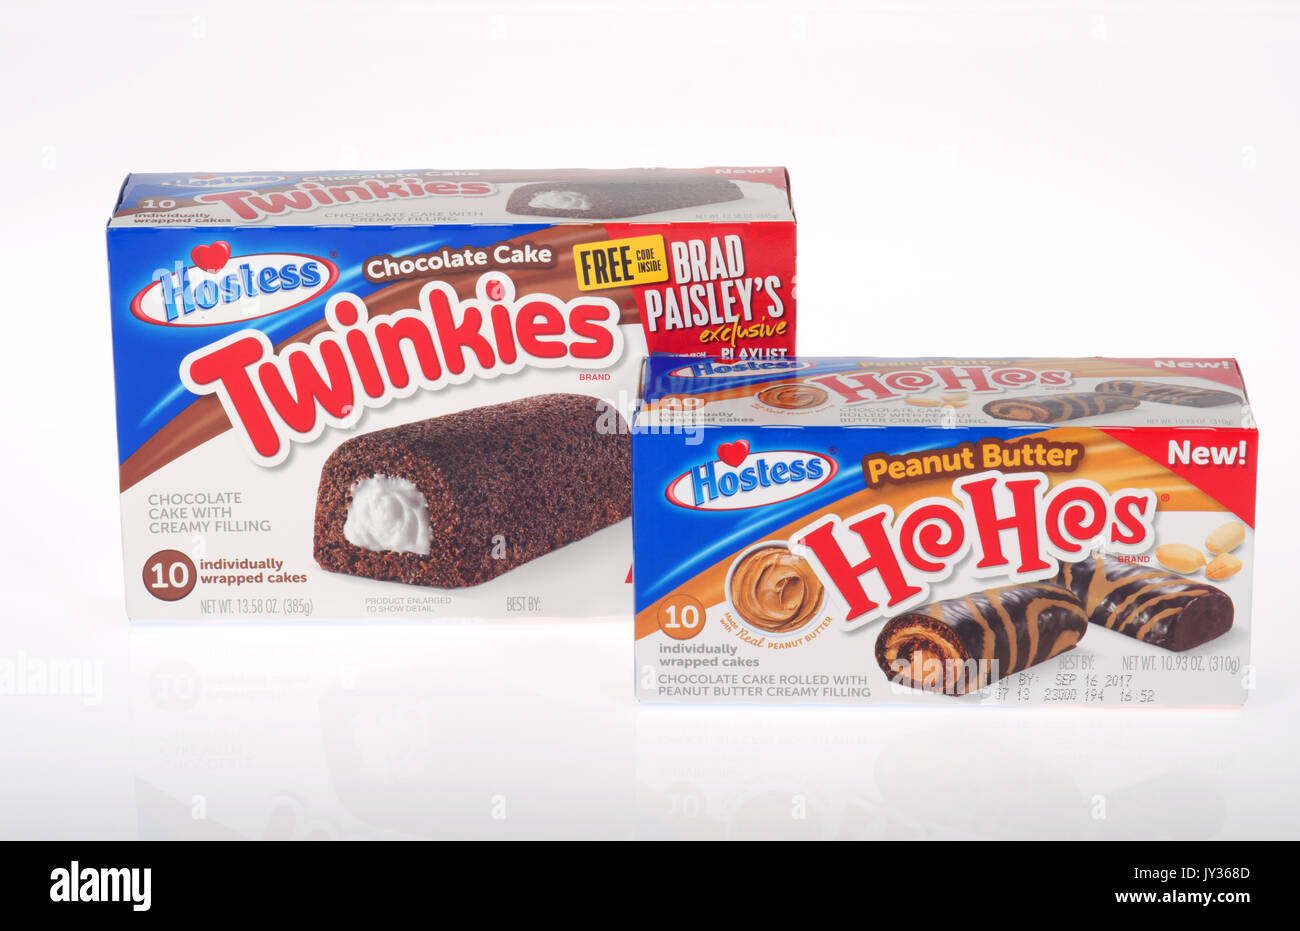 Unopened boxes of Hostess Chocolate Twinkies and peanut butter filled HoHos on white background. USA Stock Photo